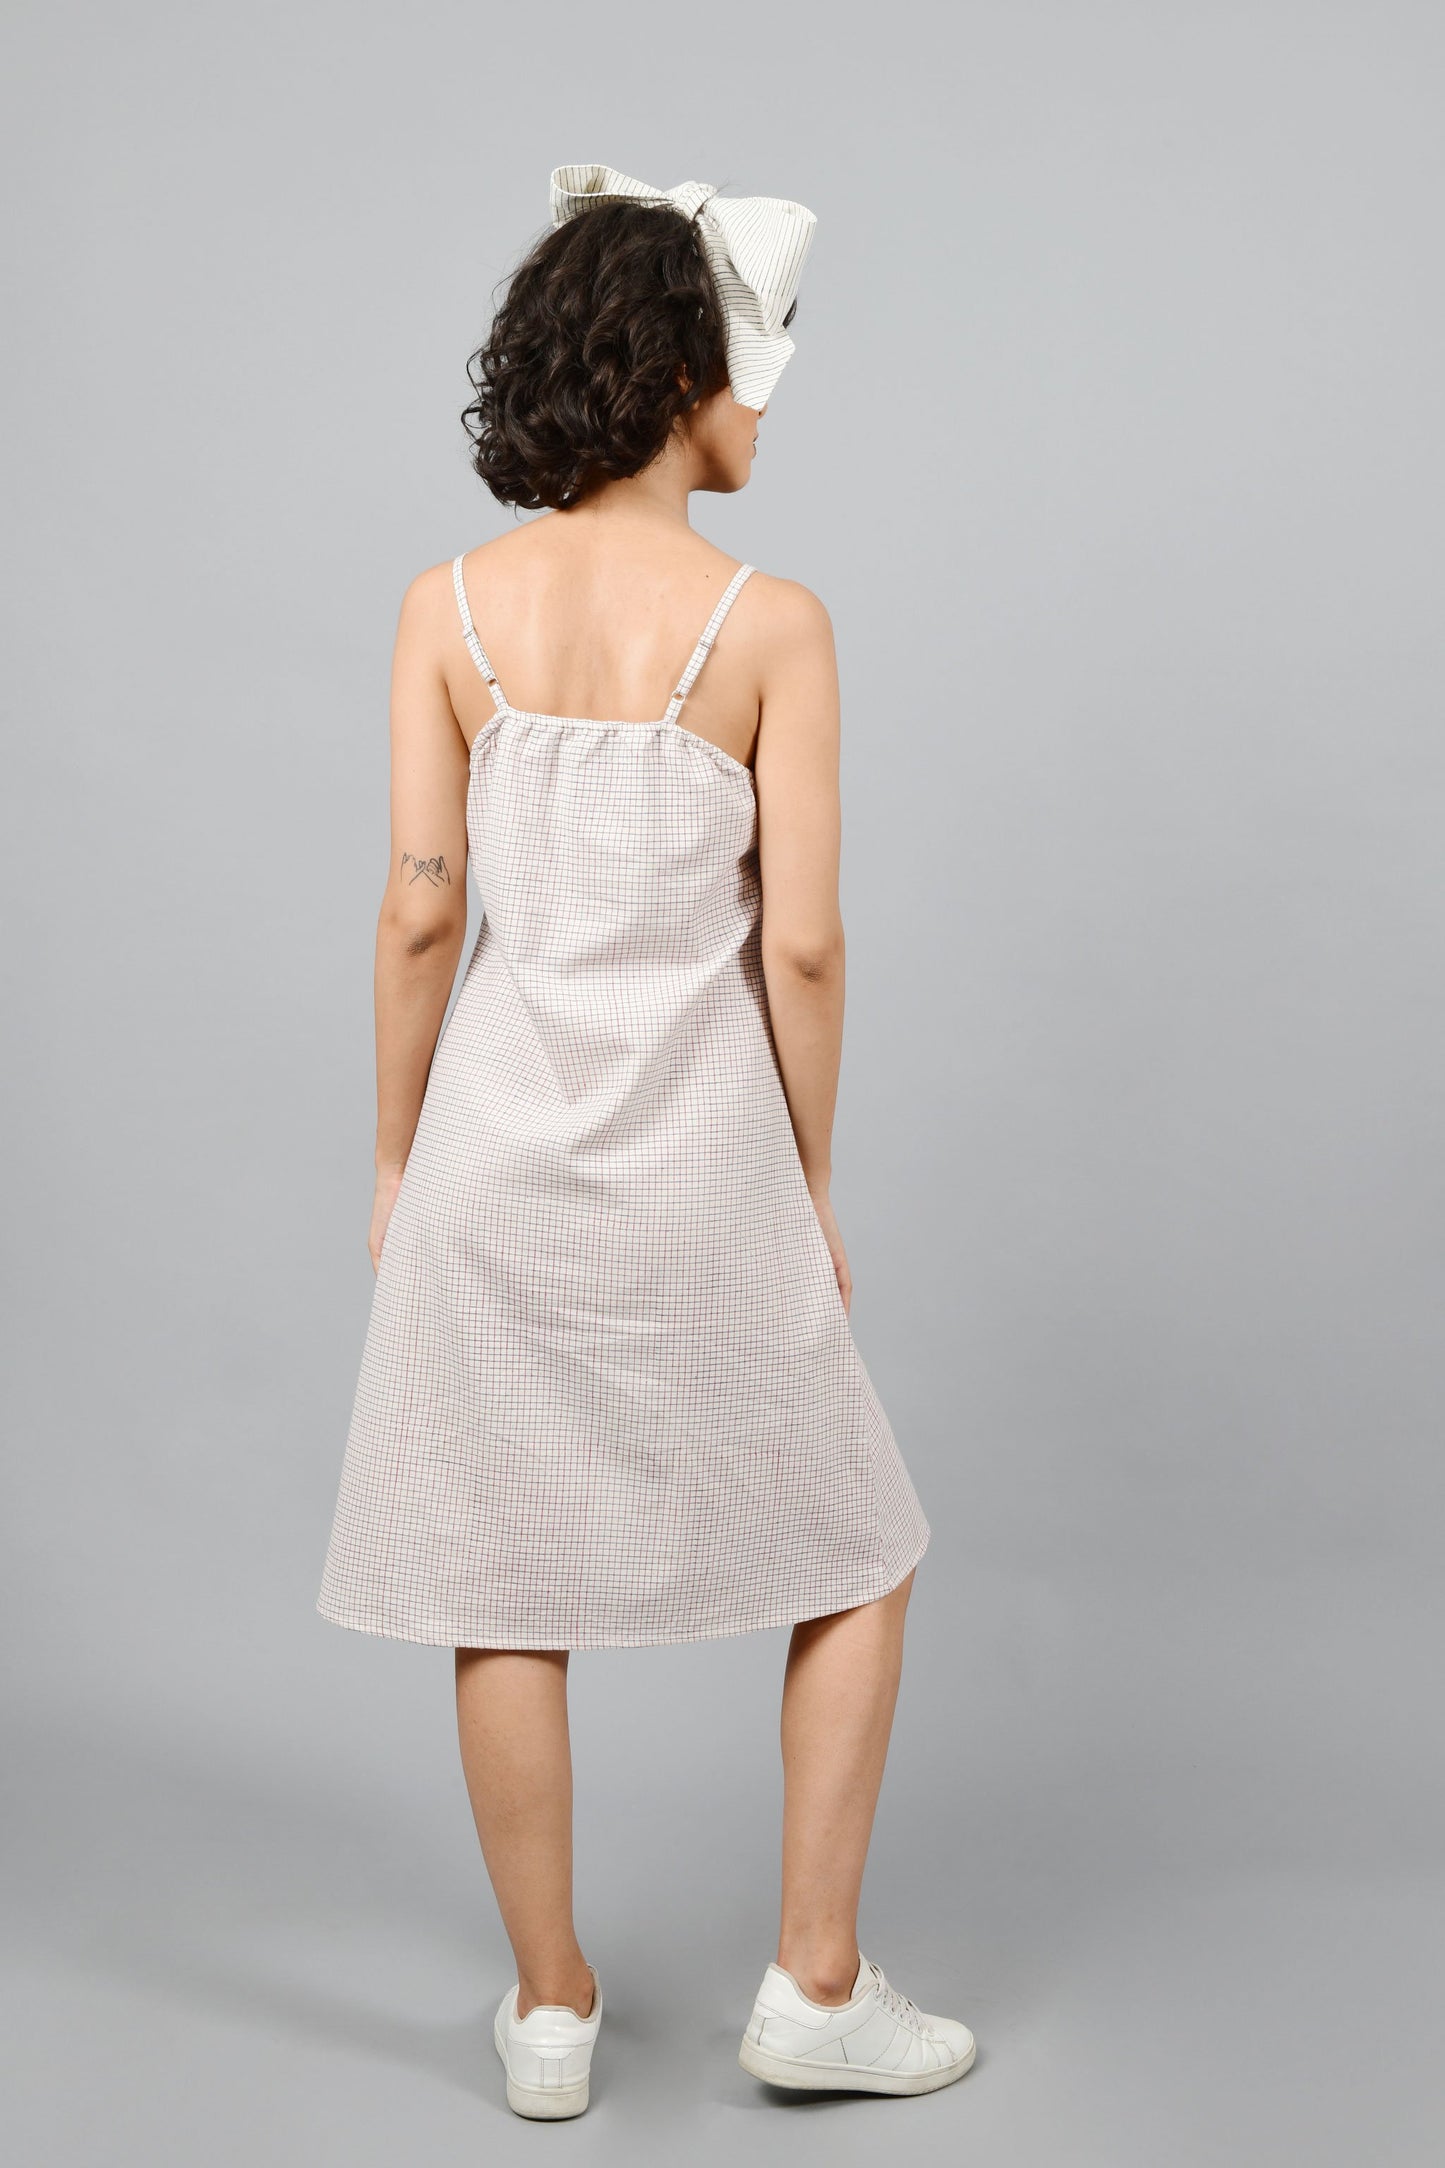 Model showing the back of the dress made by hand block printed handspun handwoven cotton khadi dress, printed with checks of red and blue on an off-white base. The model is also wearing an off-white printed bow in the same technique